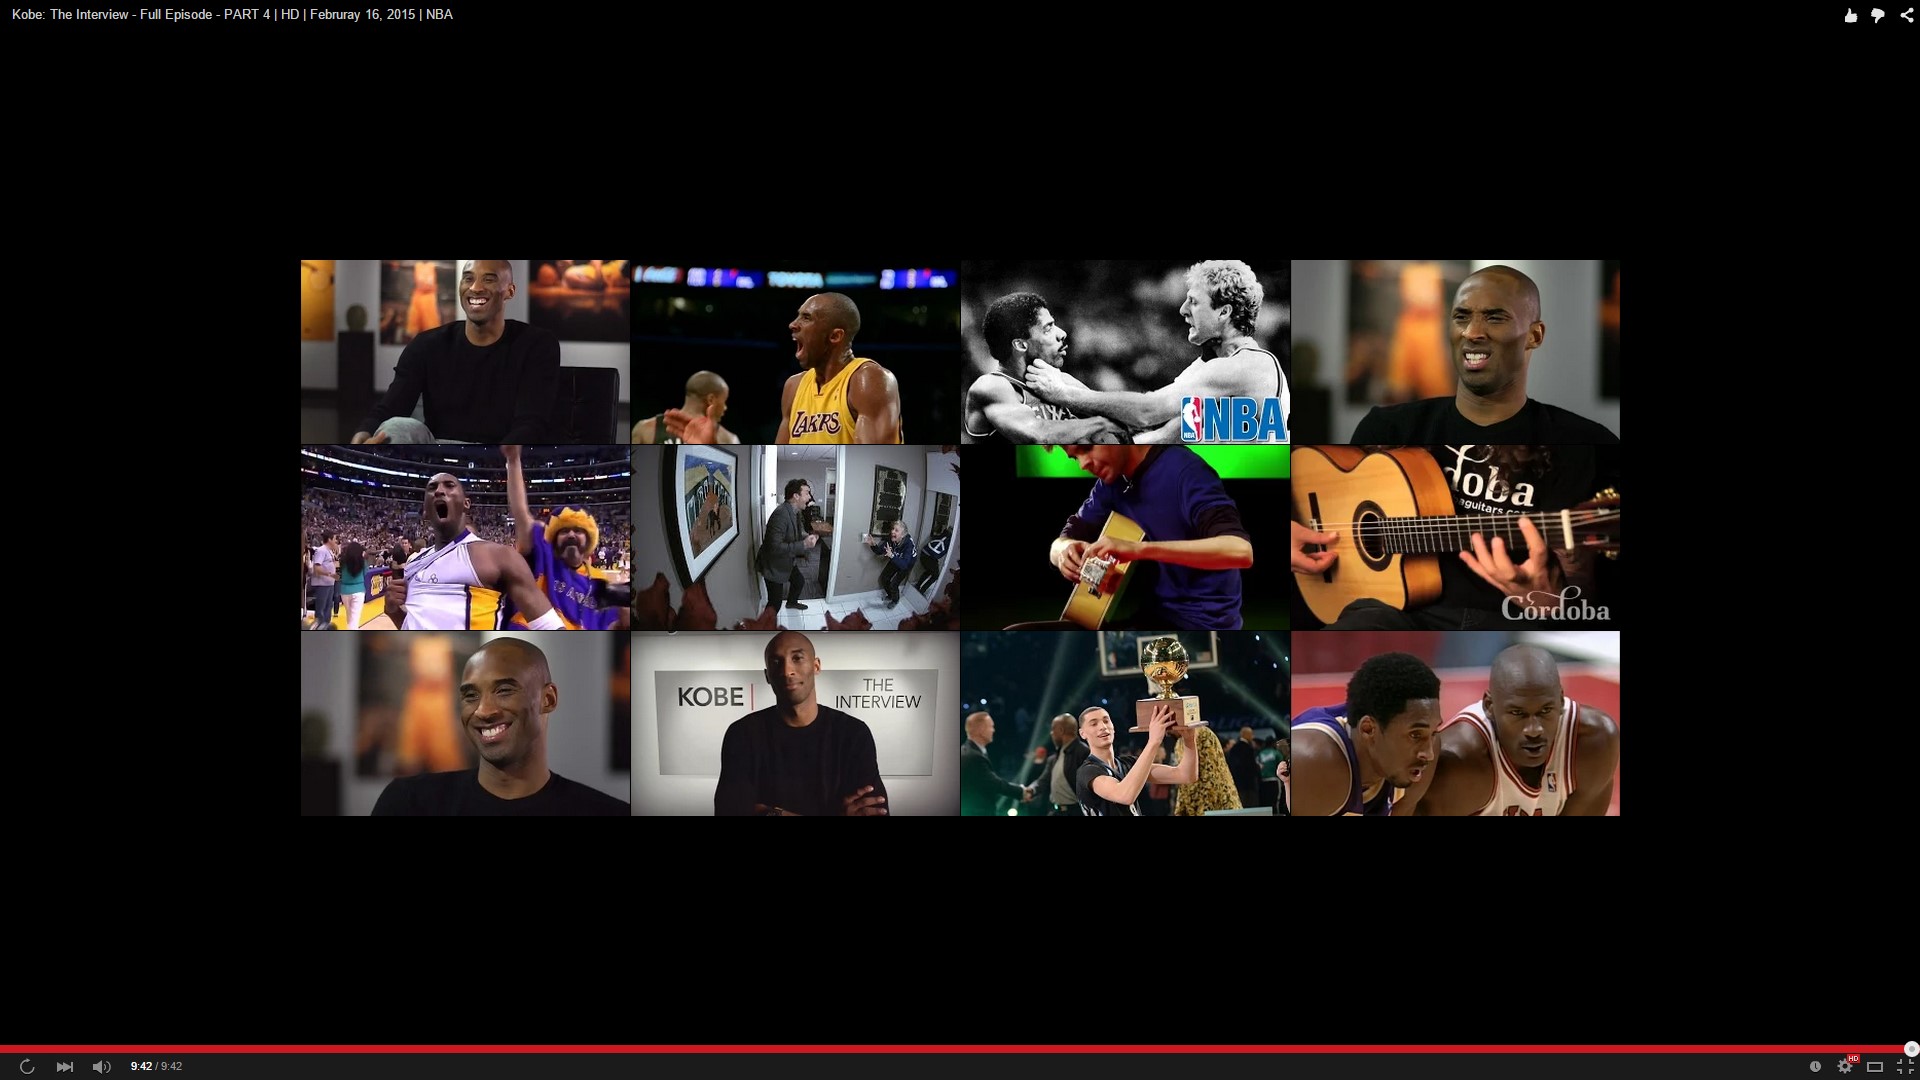 Kobe's struggling with his new guitar hobby.